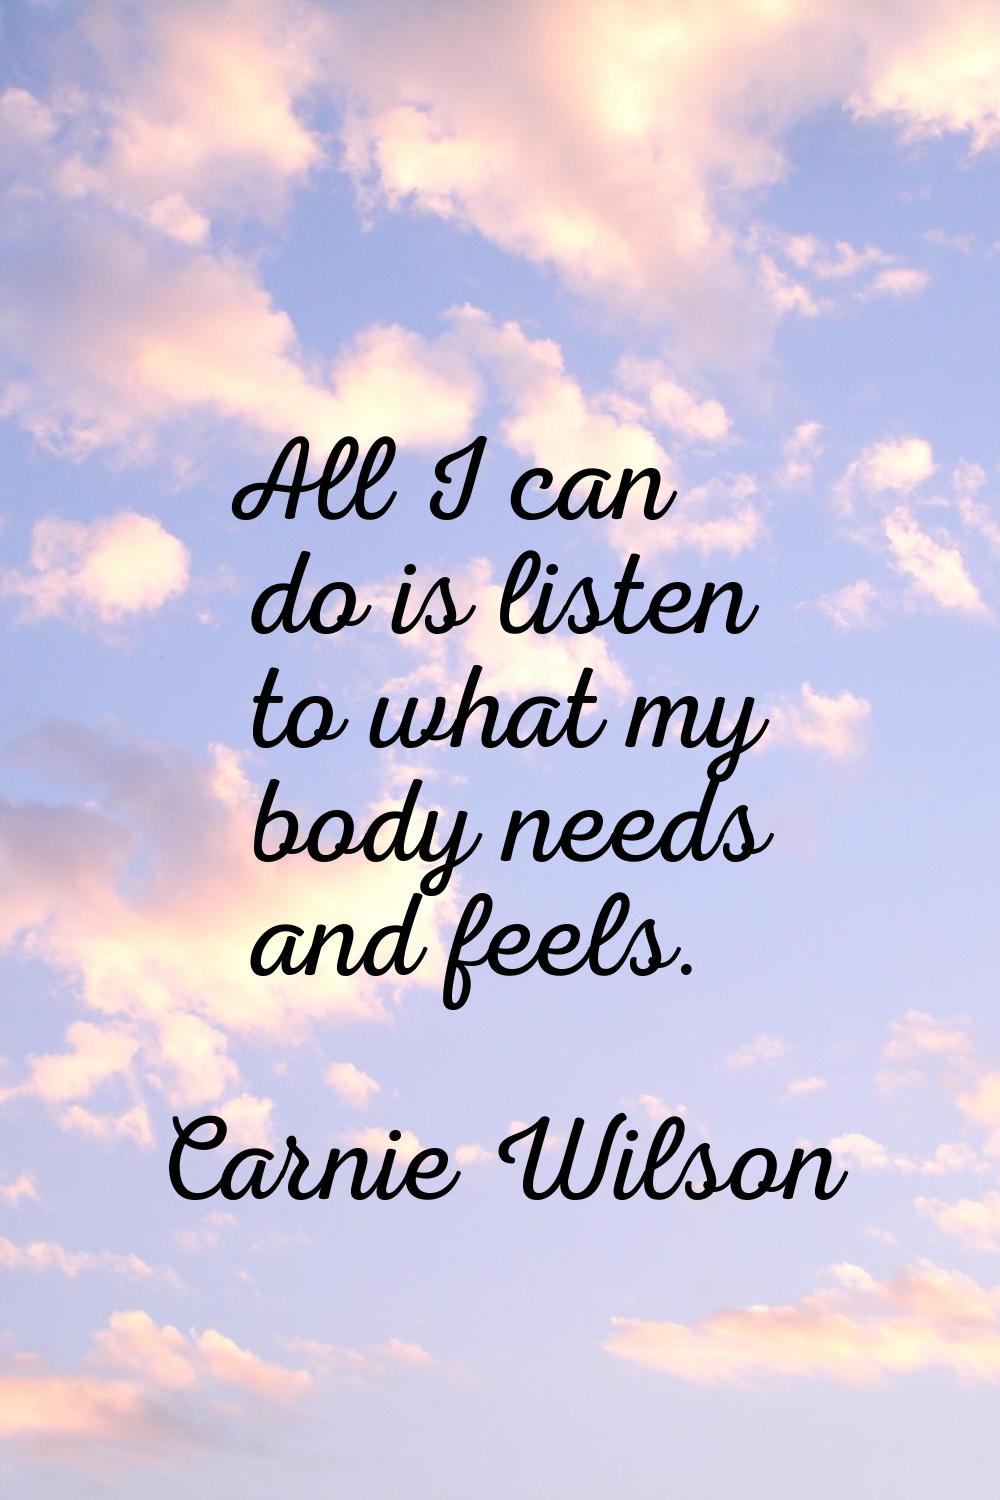 All I can do is listen to what my body needs and feels.